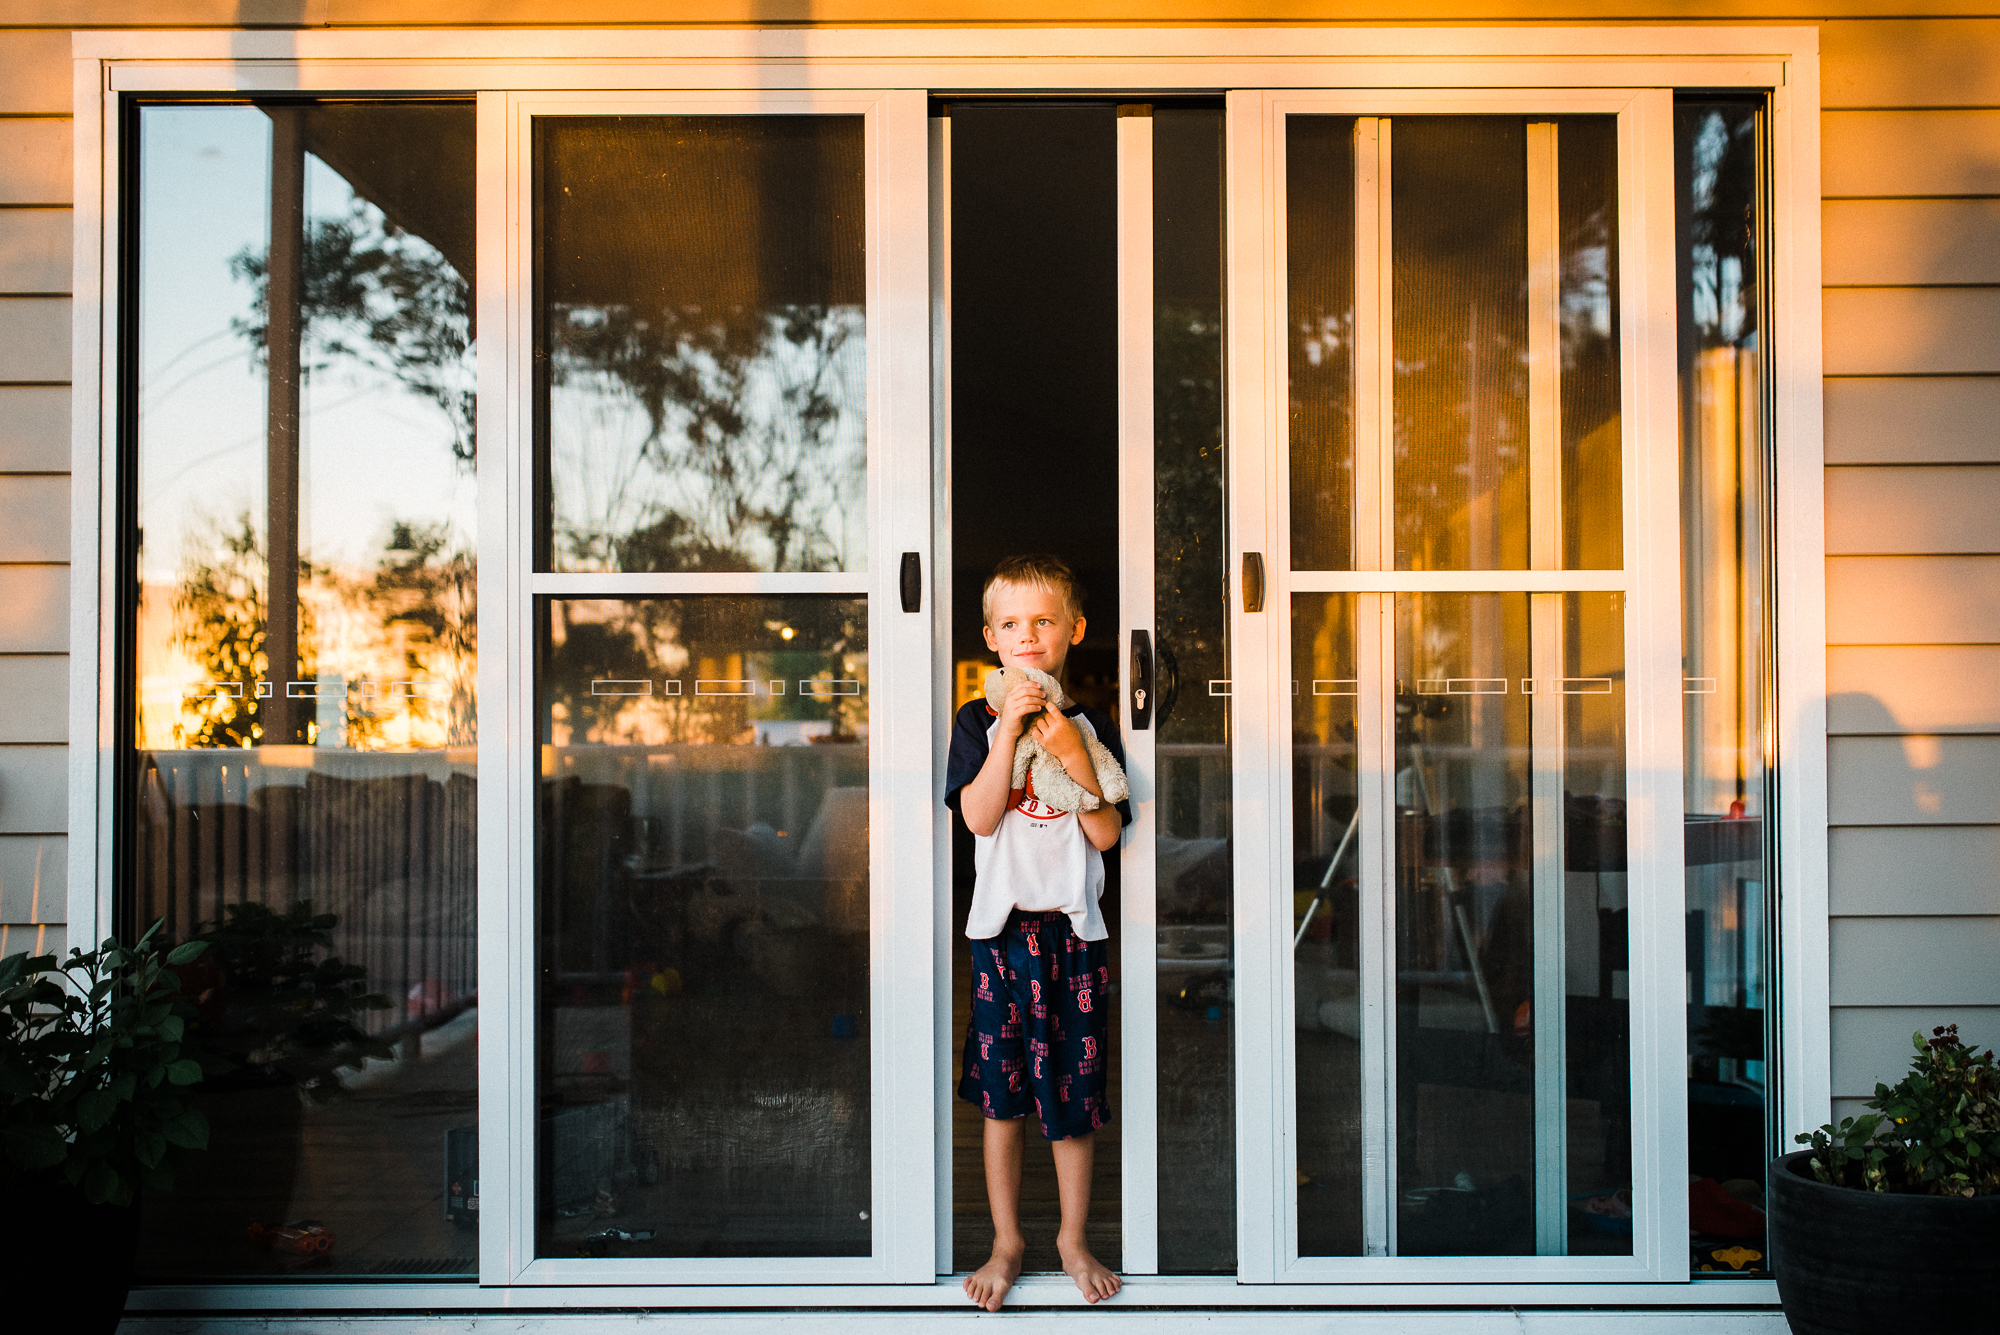 boy at door during sunset - documentary family photography